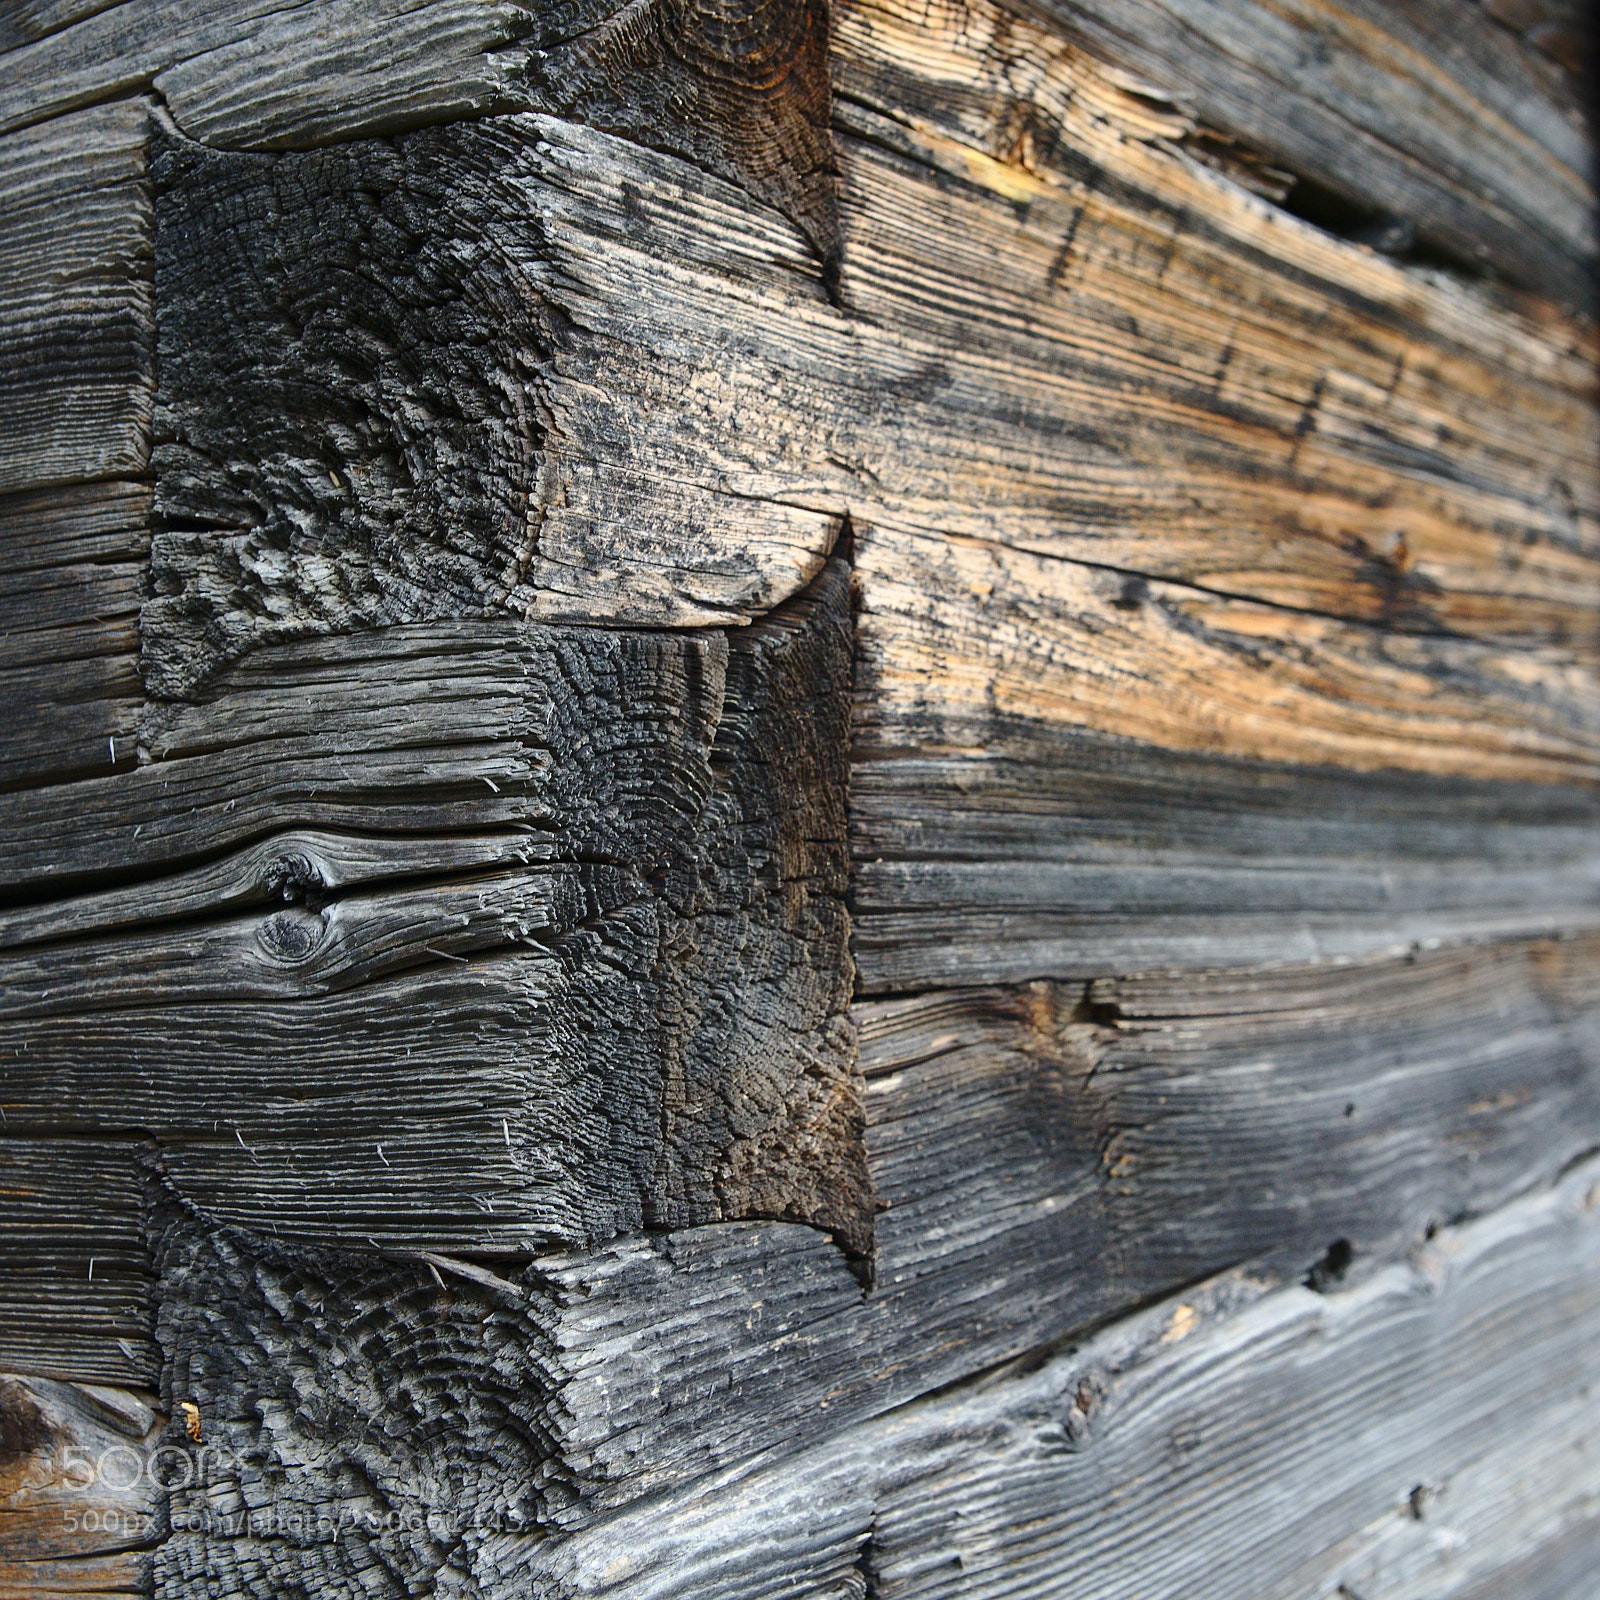 Sony a7 III sample photo. Timber joint/holzverbindung photography